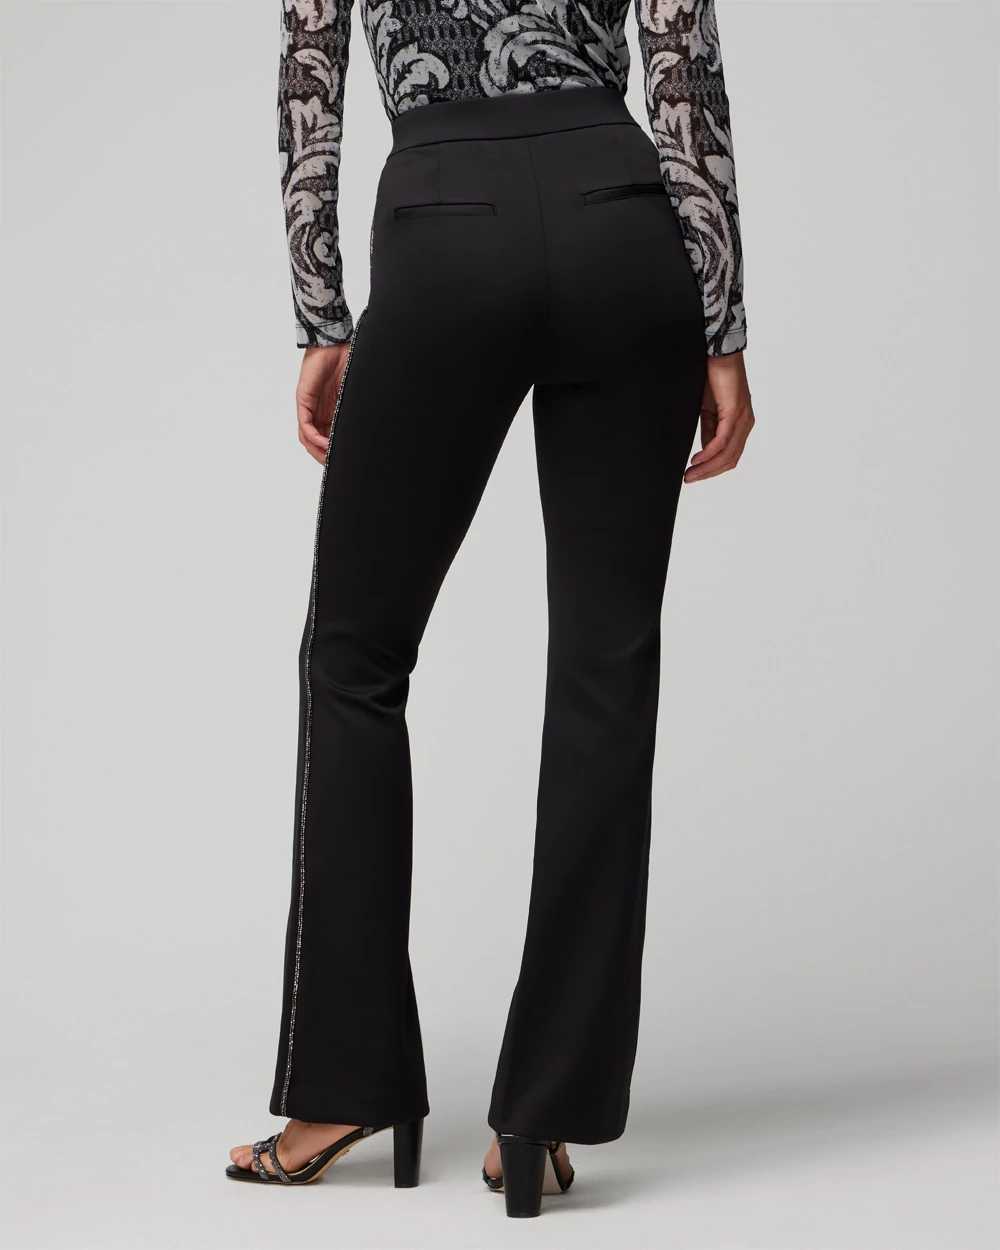 Pull On Embellished Tuxedo Trim Flare Pants click to view larger image.